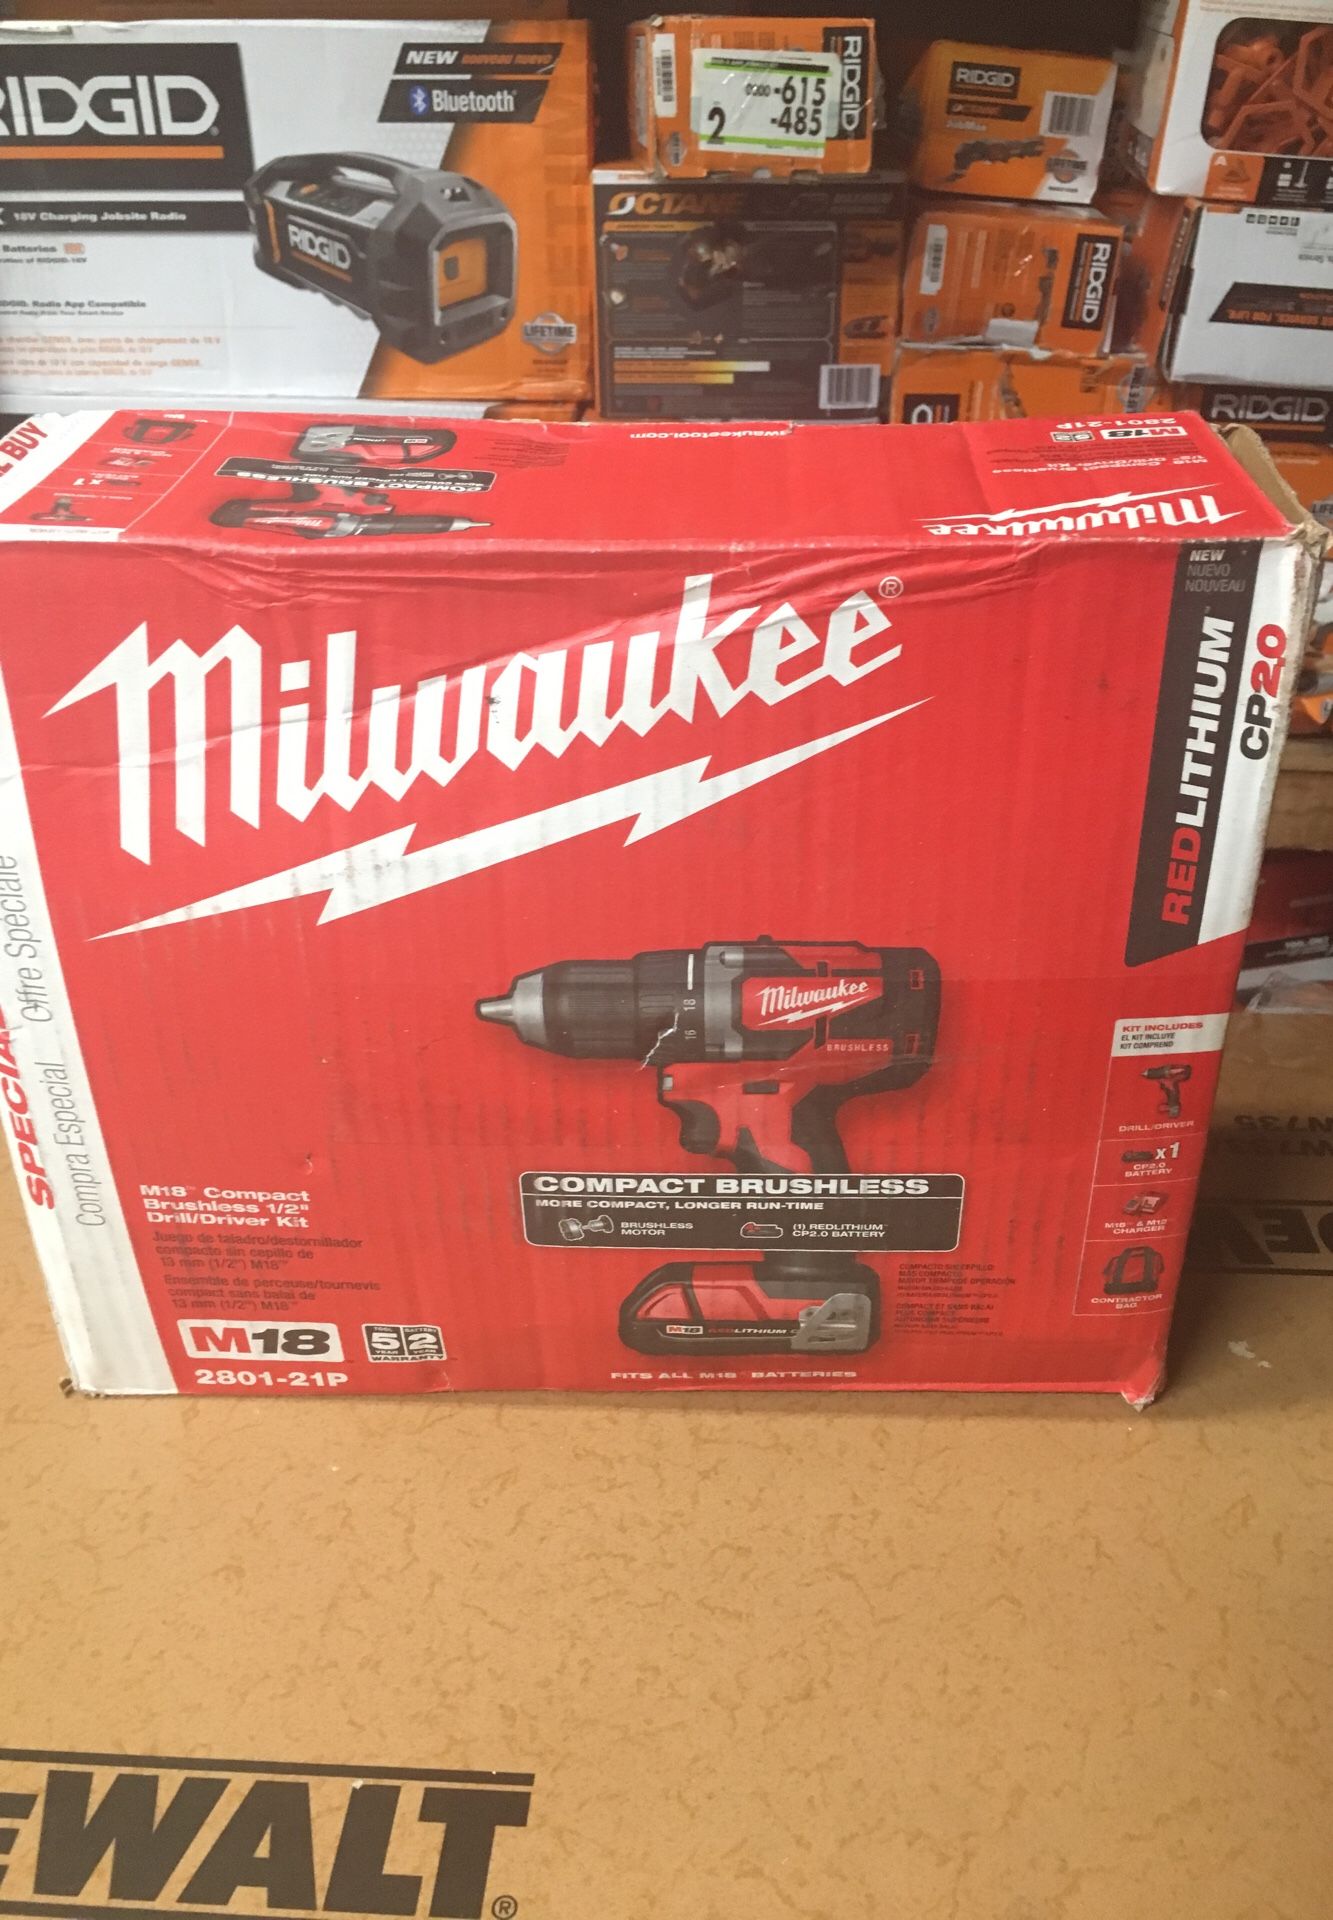 Milwaukee M18 18-Volt Lithium-Ion Brushless Cordless 1/2 in. Compact Drill/Driver with (1) 2.0 Ah Battery, Charger and Tool Bag